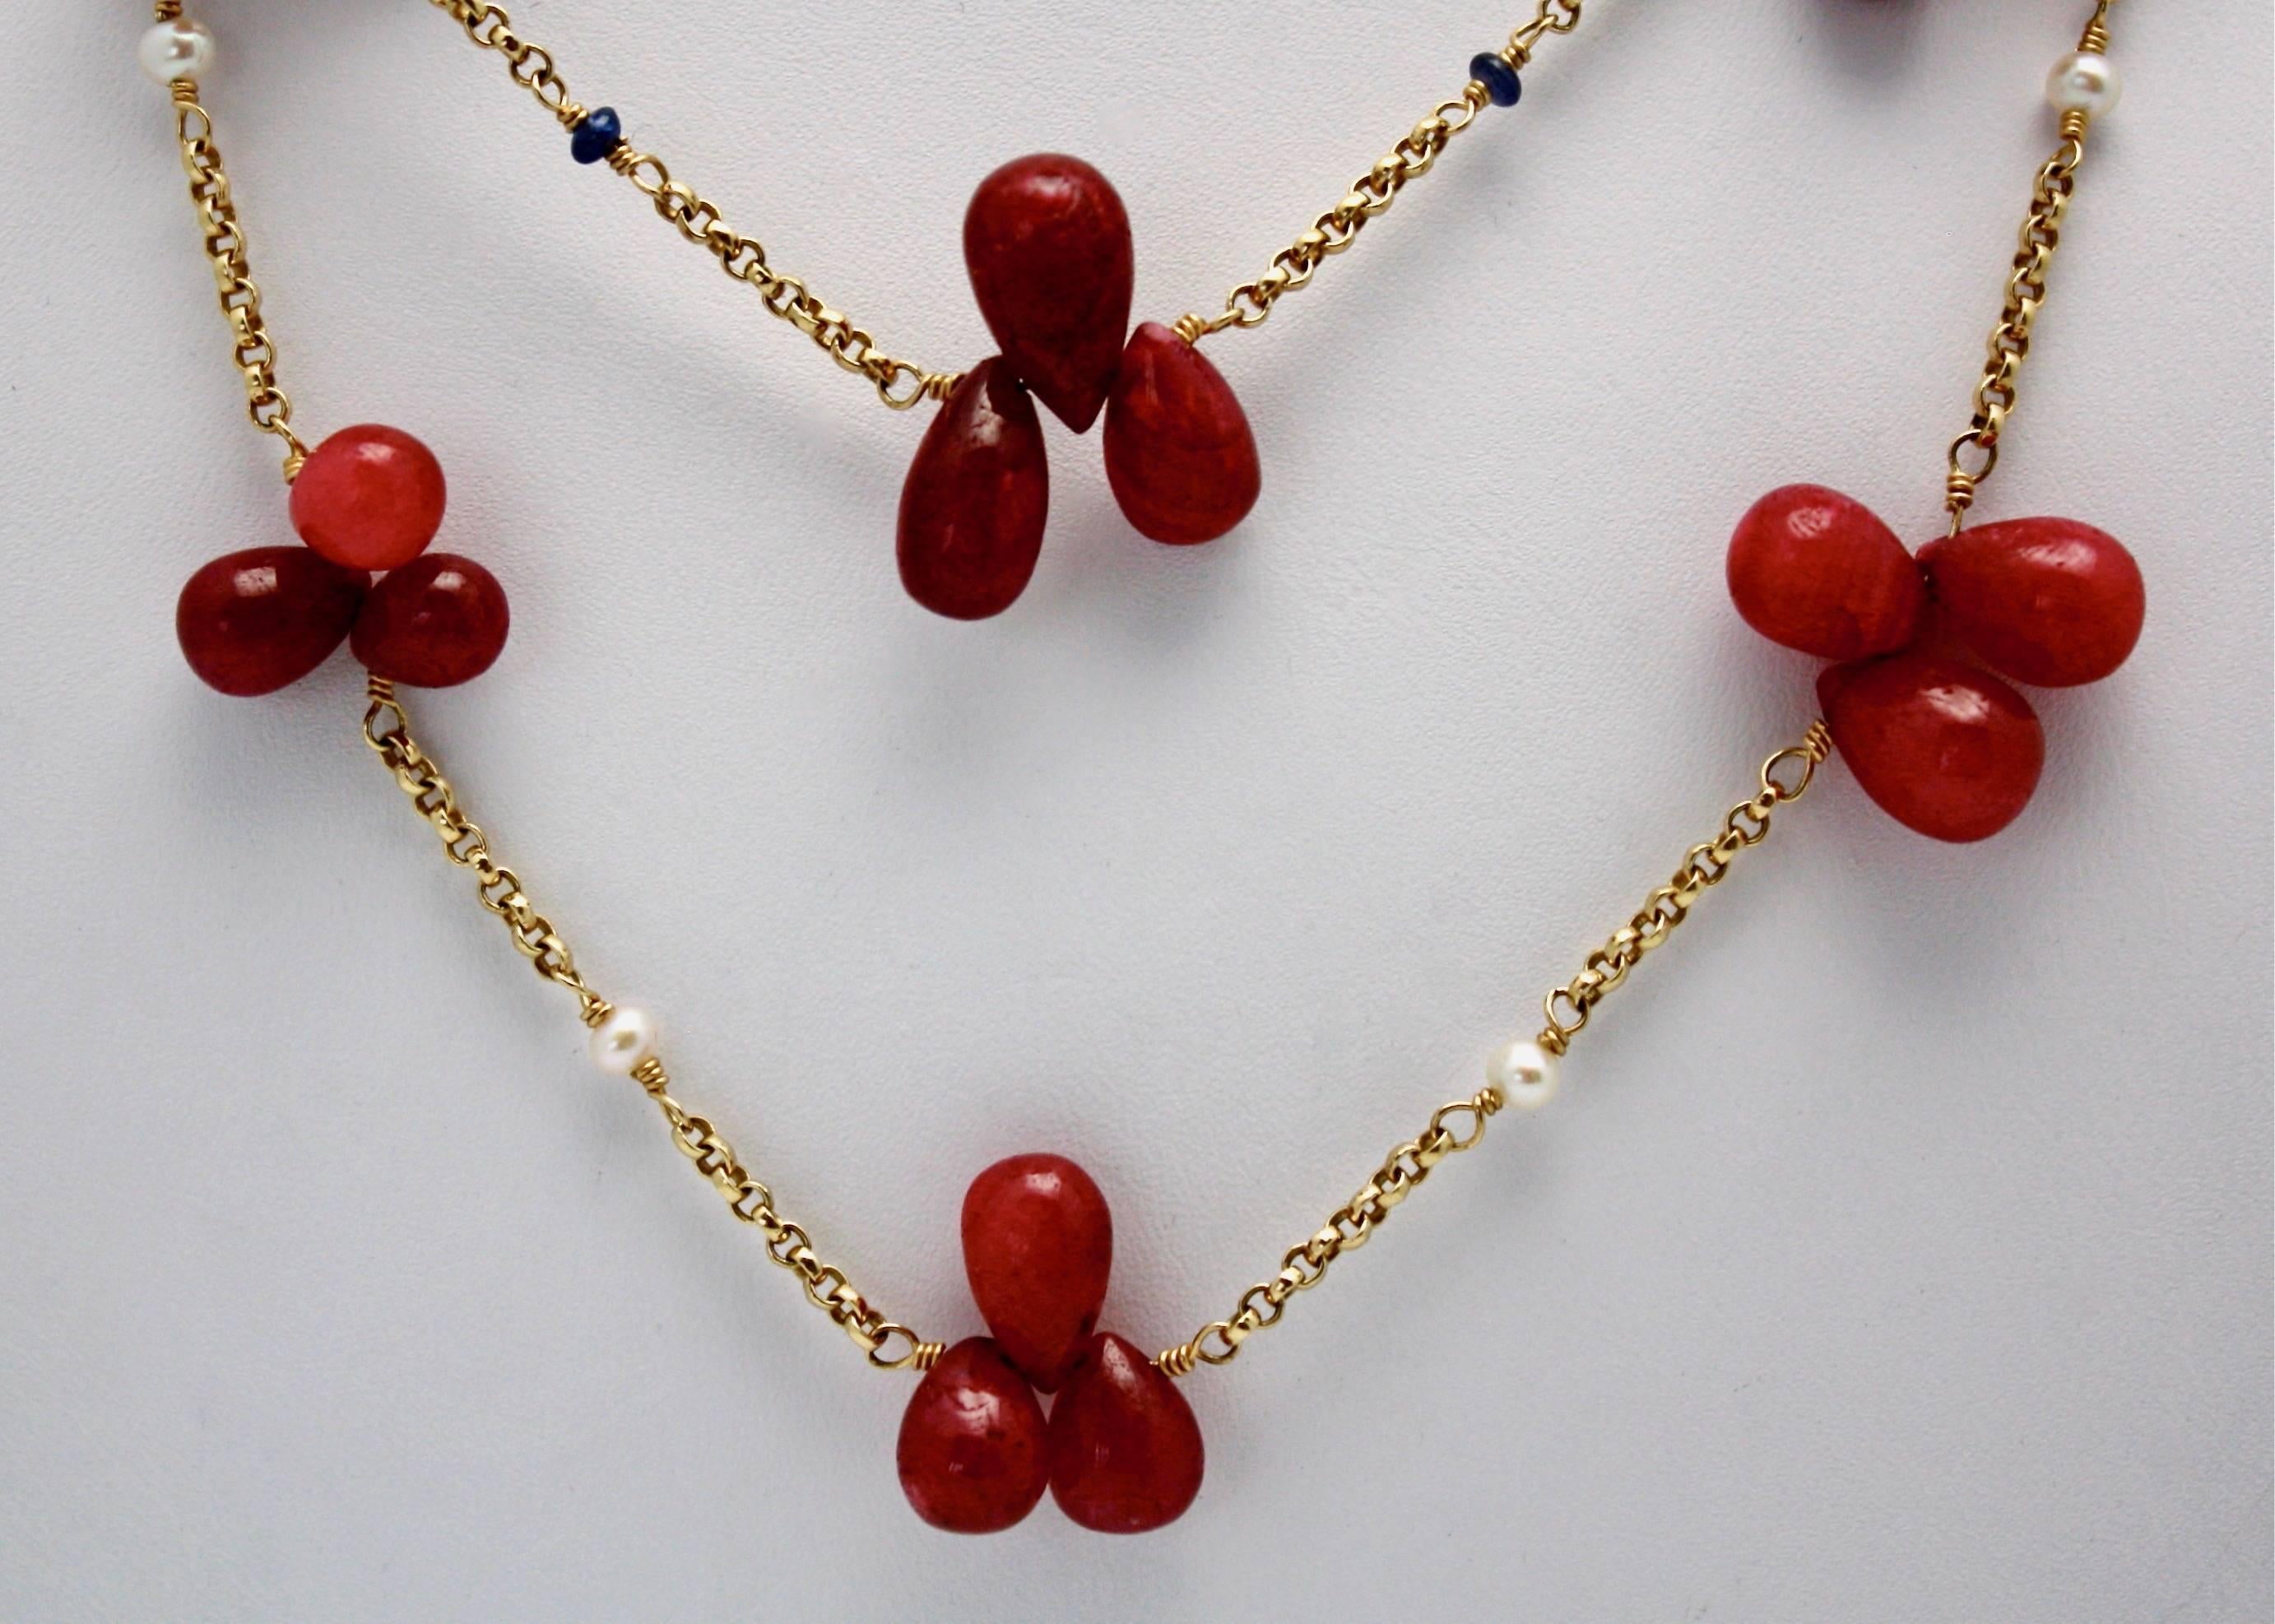 These teardrop Ruby beads are two necklaces put together,or worn individually.  One is set with Seed Pearls and the other with Sapphire beads. Each necklace is 17